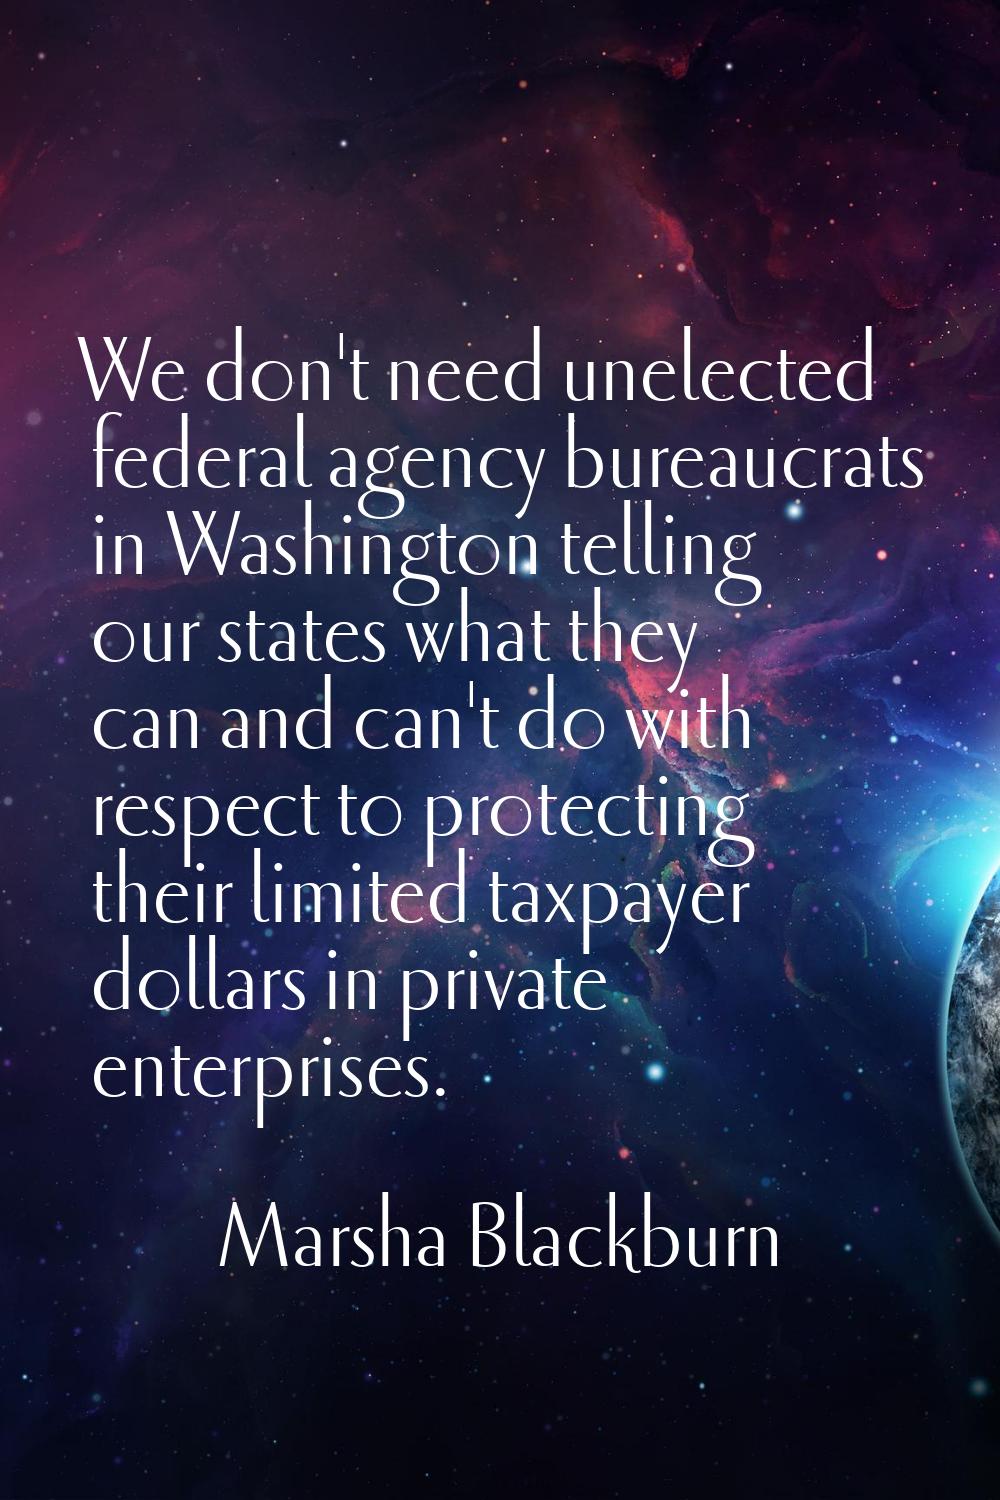 We don't need unelected federal agency bureaucrats in Washington telling our states what they can a